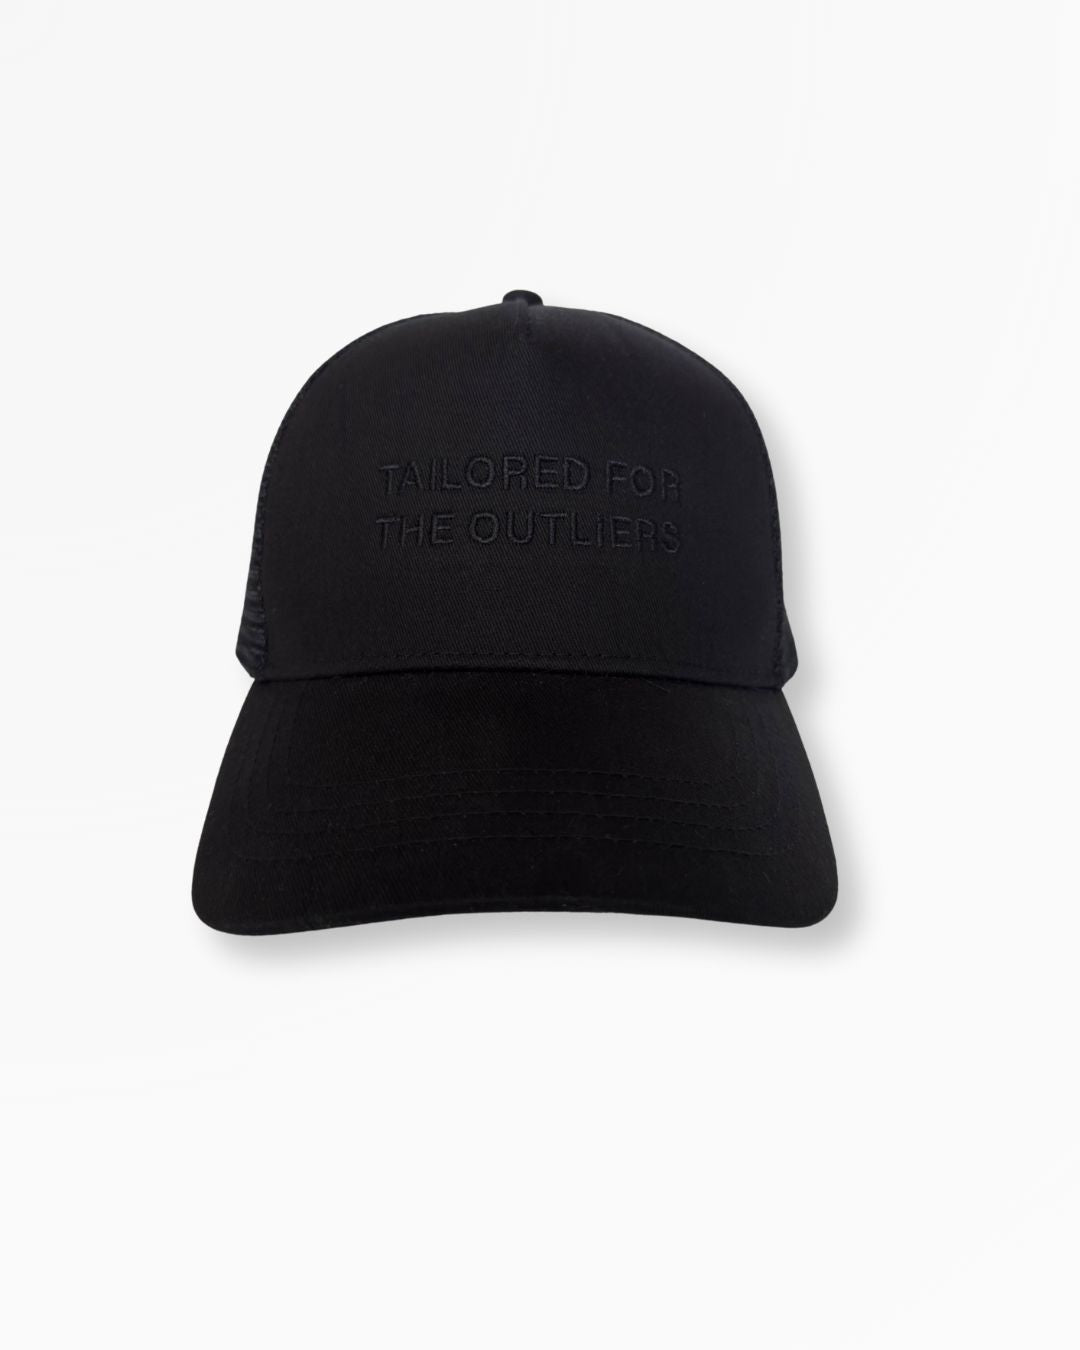 Tailored For The Outliers | Trucker Hat